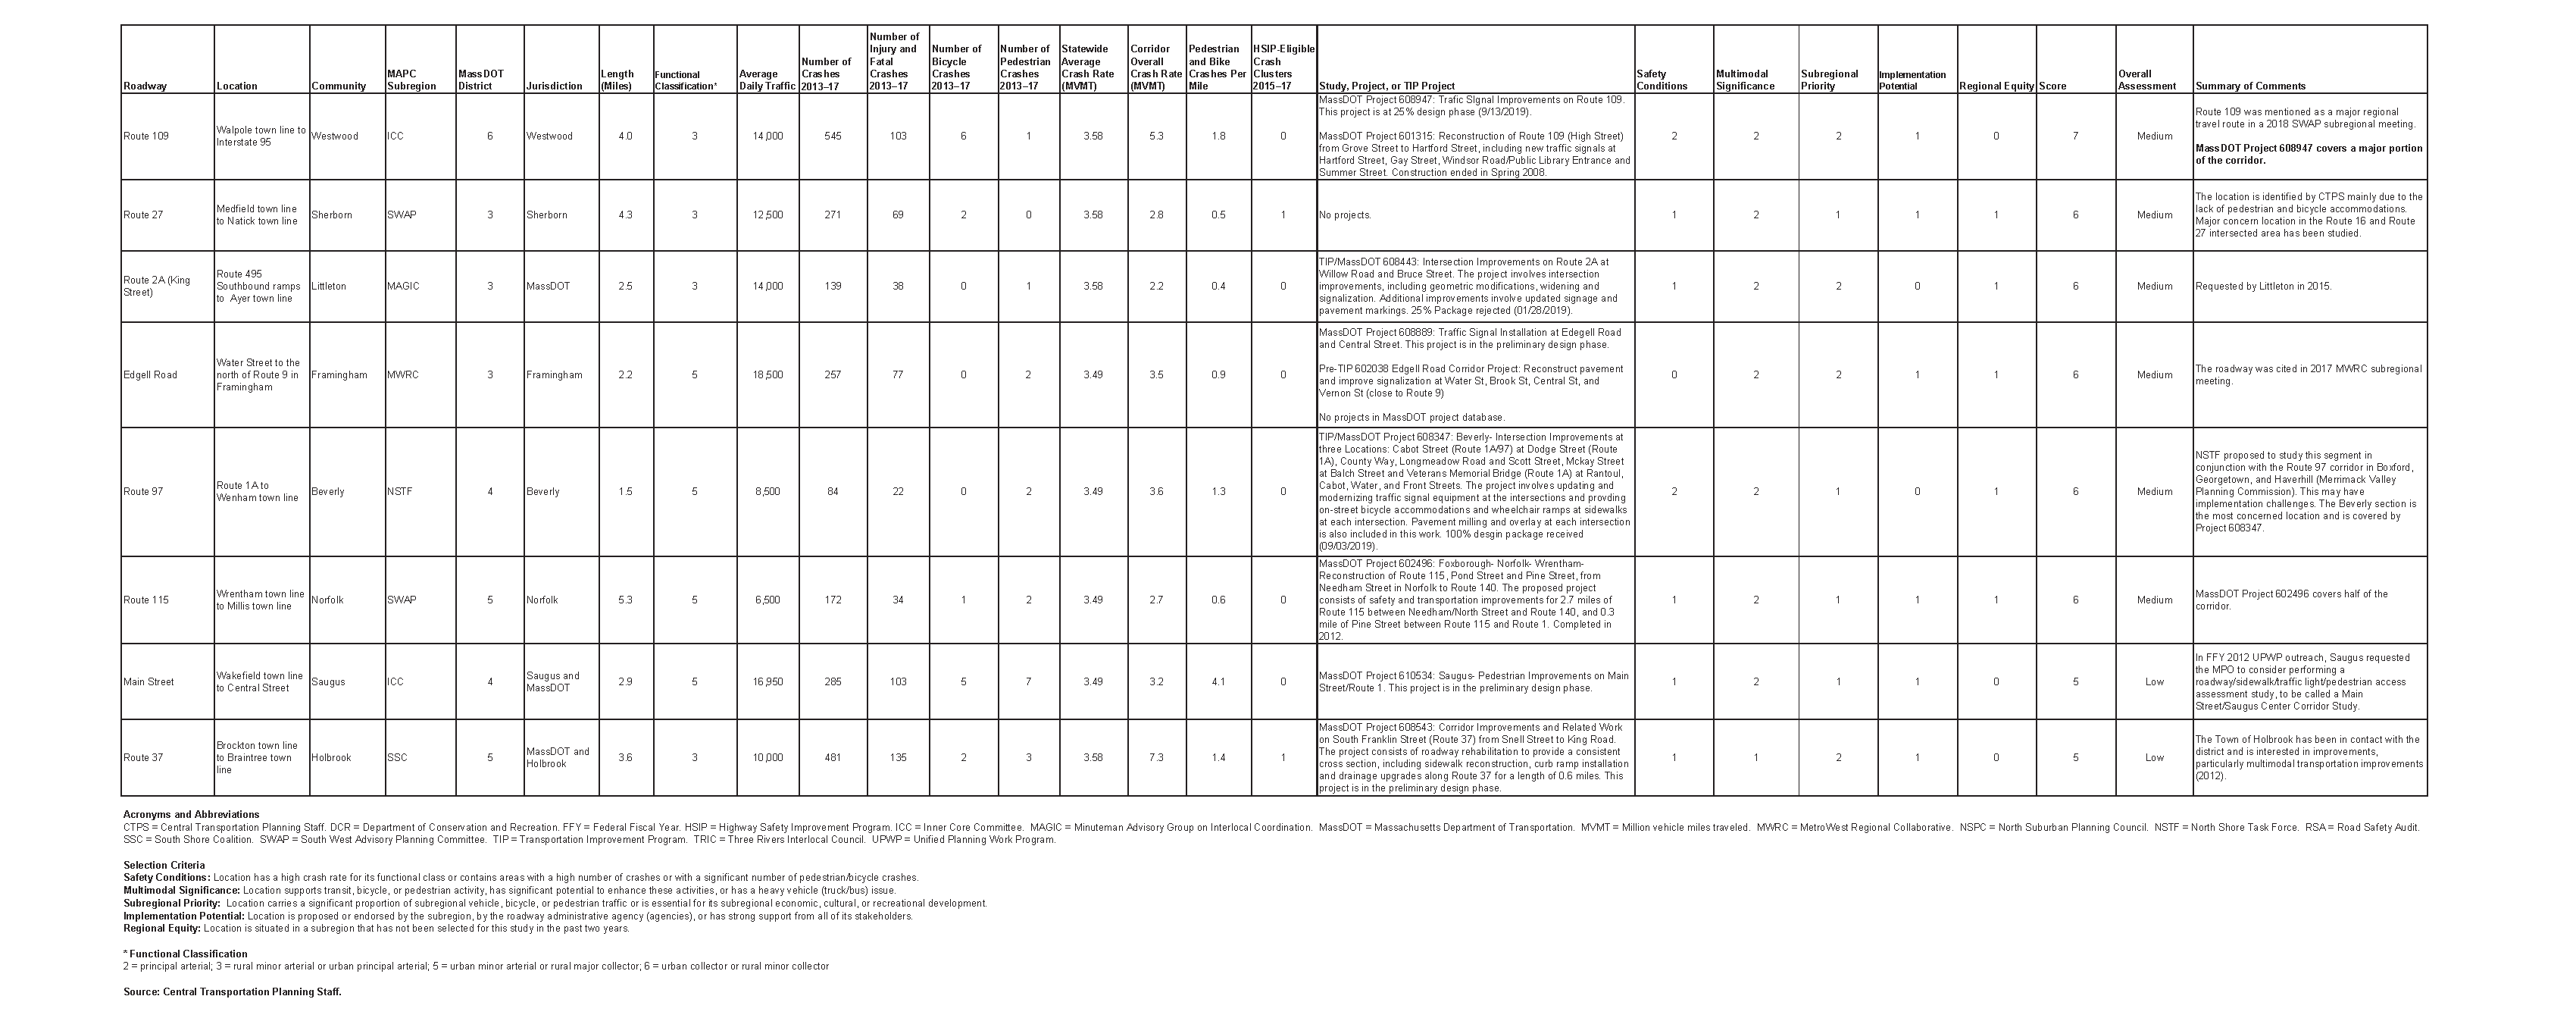 Table 1: Roadway Segments Considered for Study. Page 2 of 2.